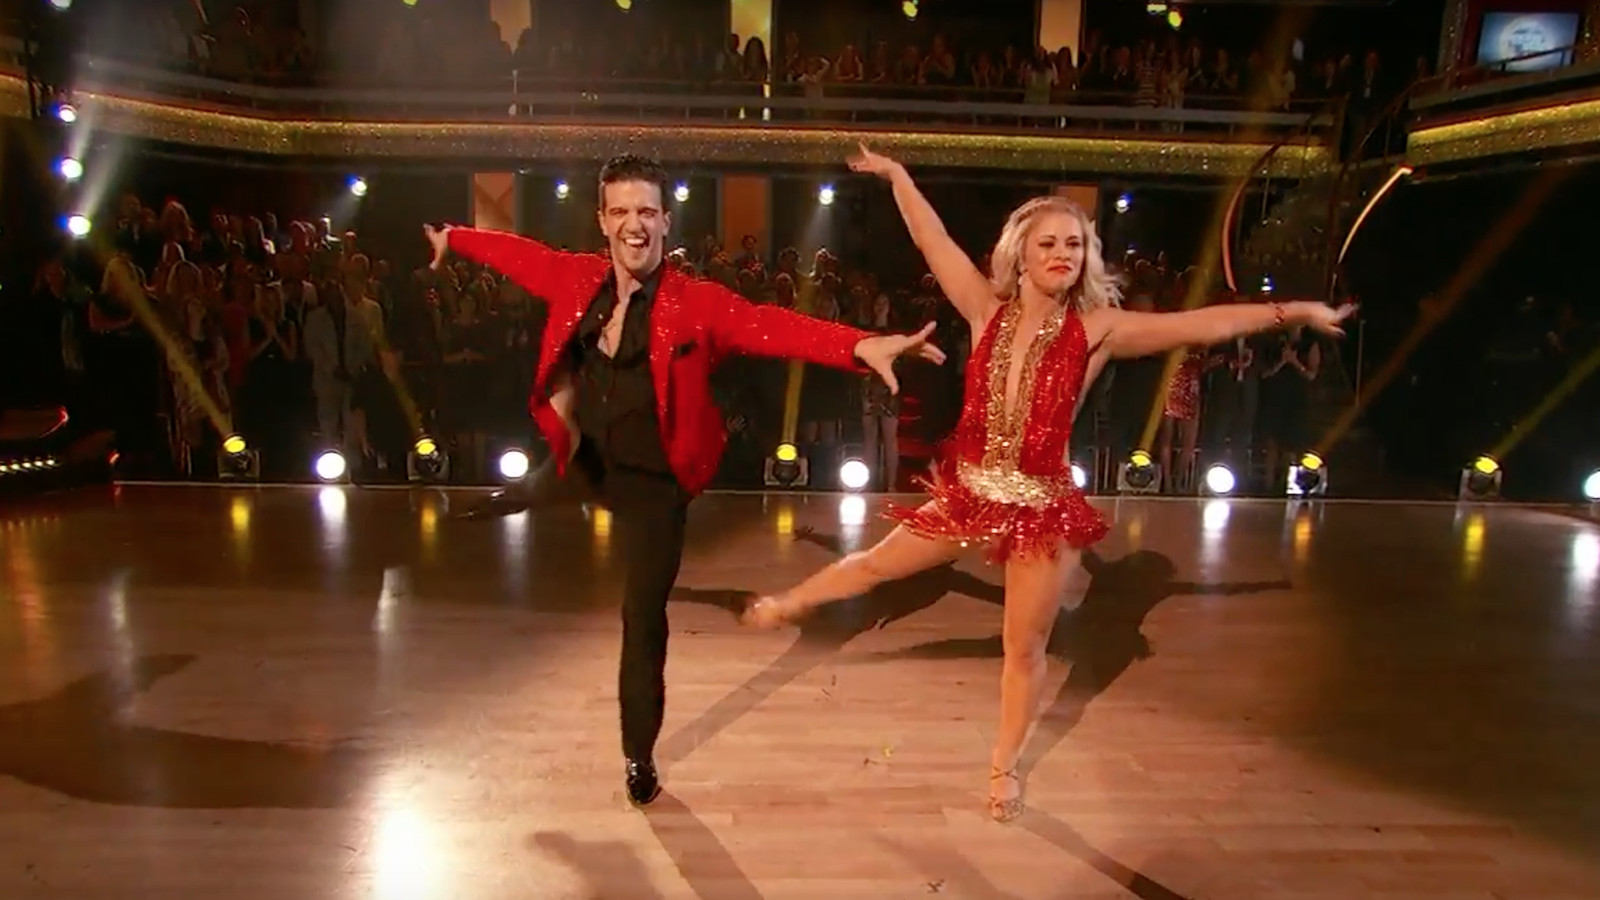 Video: Paige VanZant ends up in second place at Dancing With the Stars